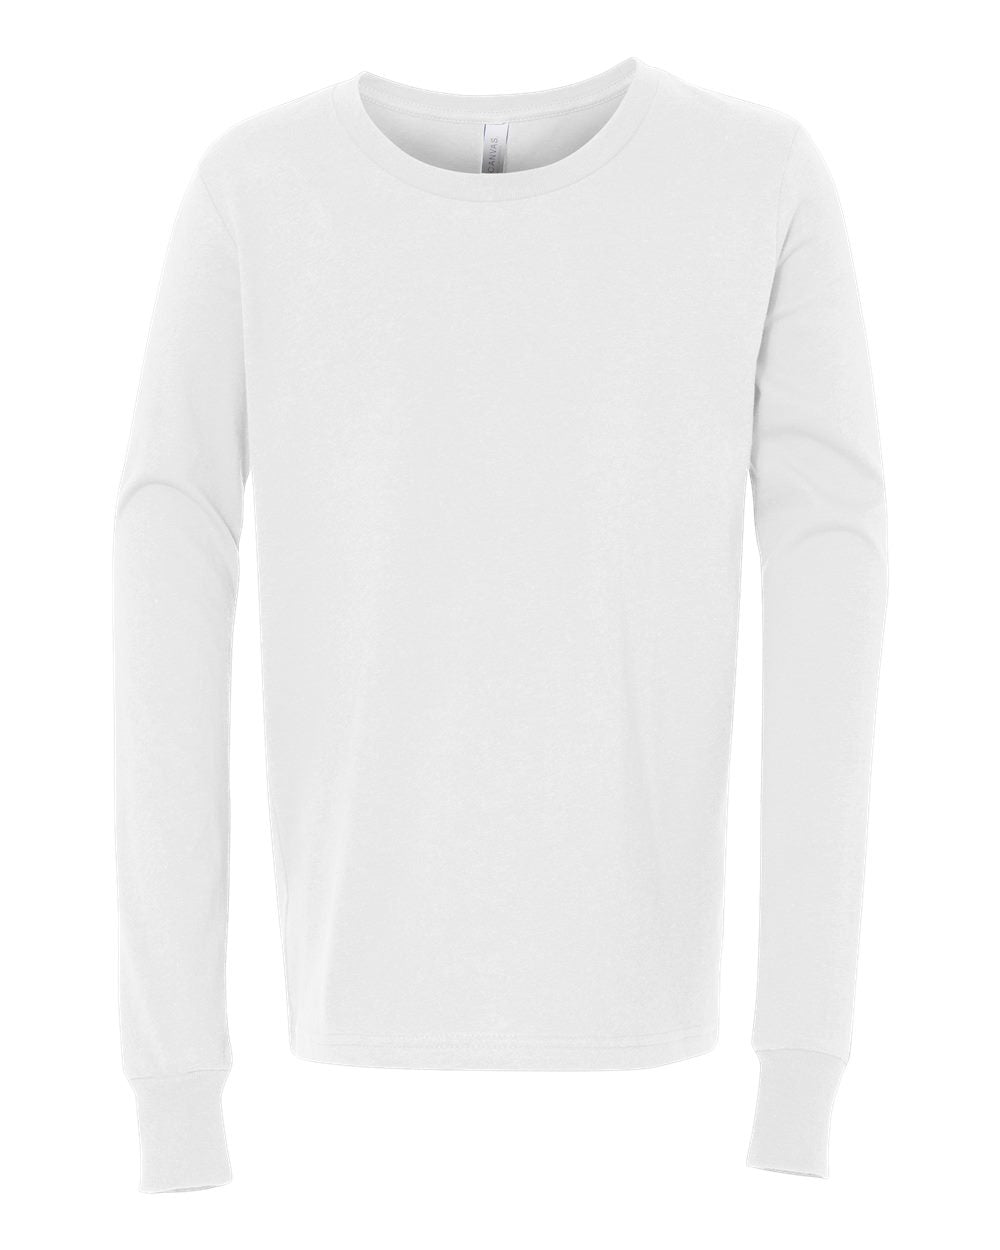 bella+canvas youth long sleeve tee white